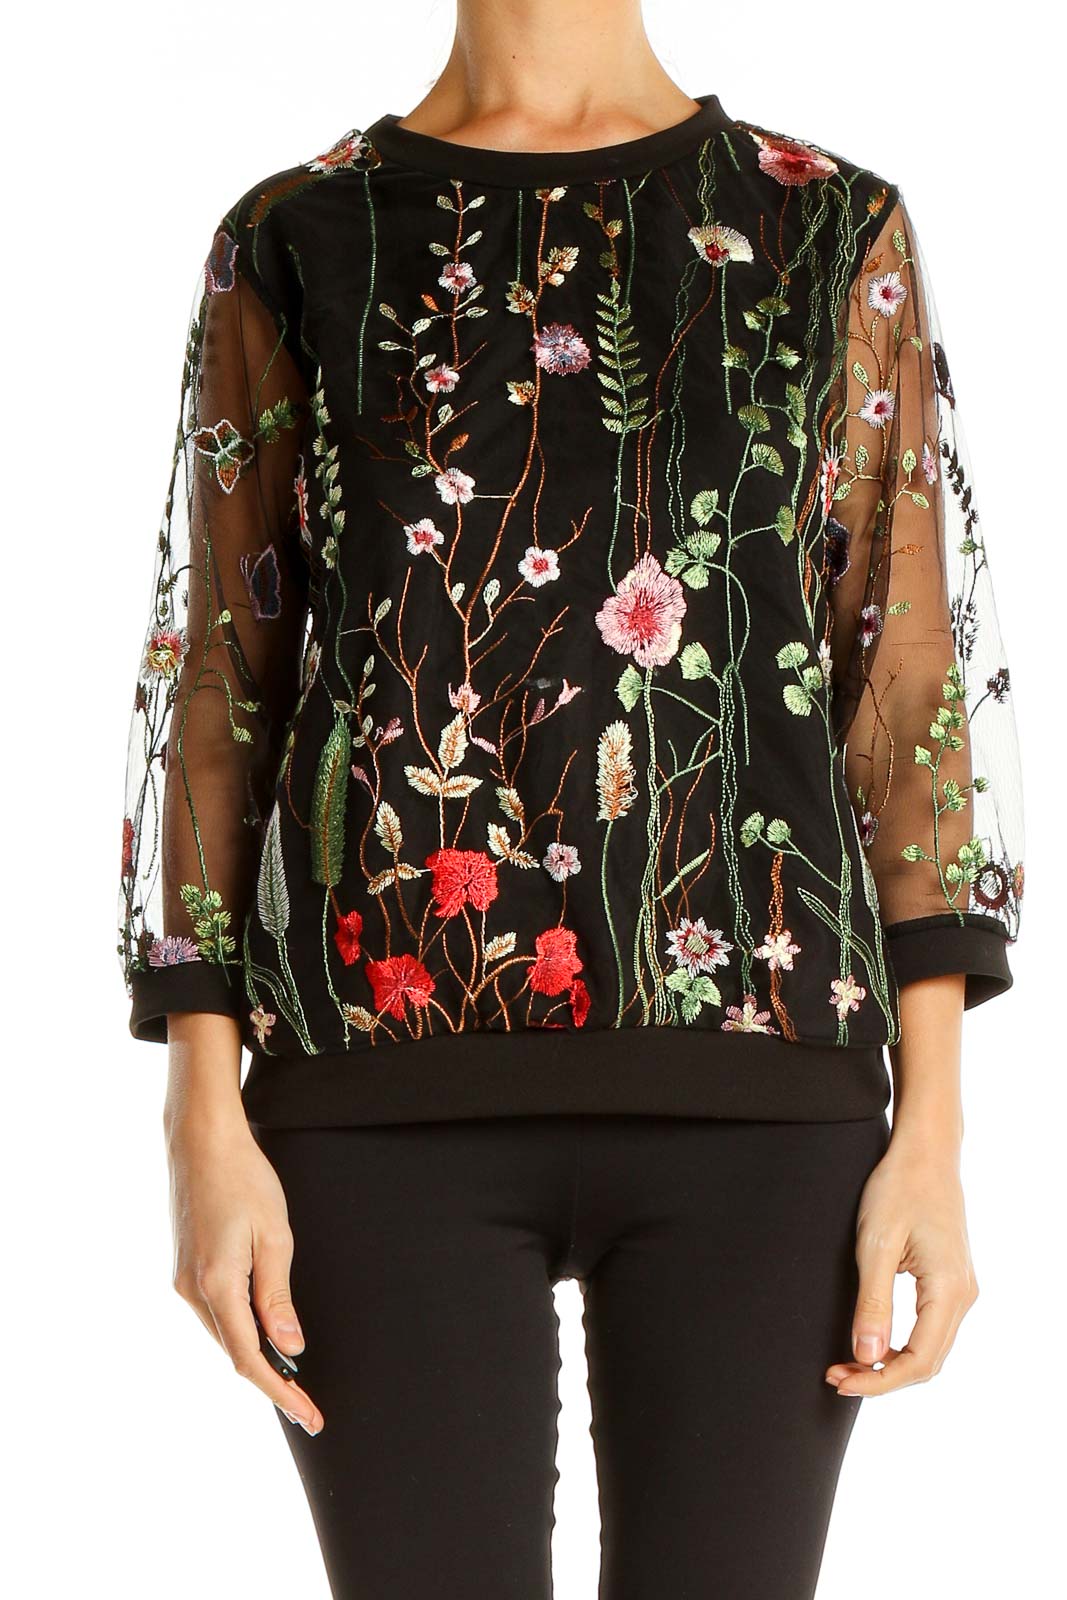 Black Floral Embroidery Bohemian Top Front